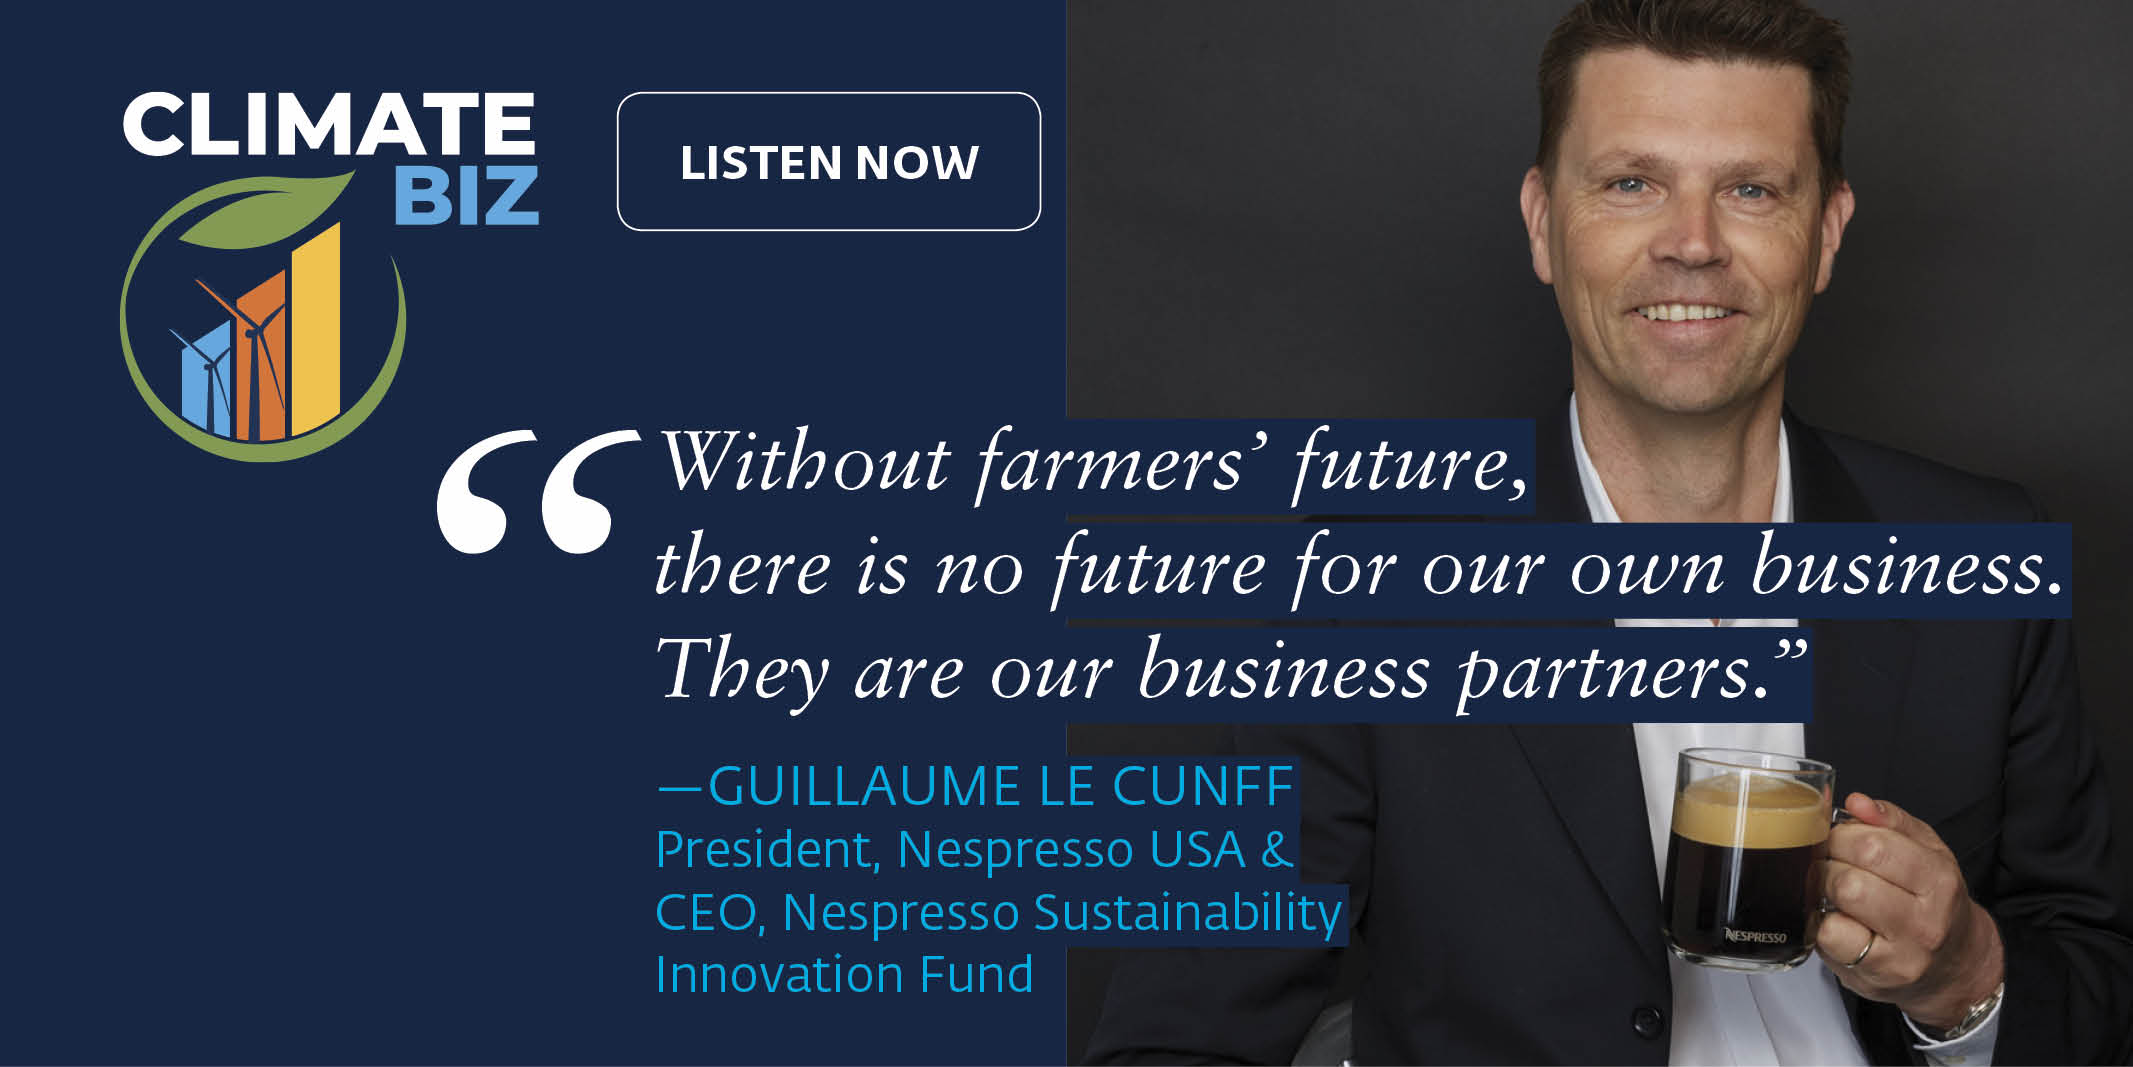 IFC on Twitter: "ICYMI: Guillaume Cunff, @Nespresso's new CEO, joined us for a #ClimateBiz podcast, speaking on how Nespresso's coffee ☕️ production is being made more sustainable &amp; resilient to